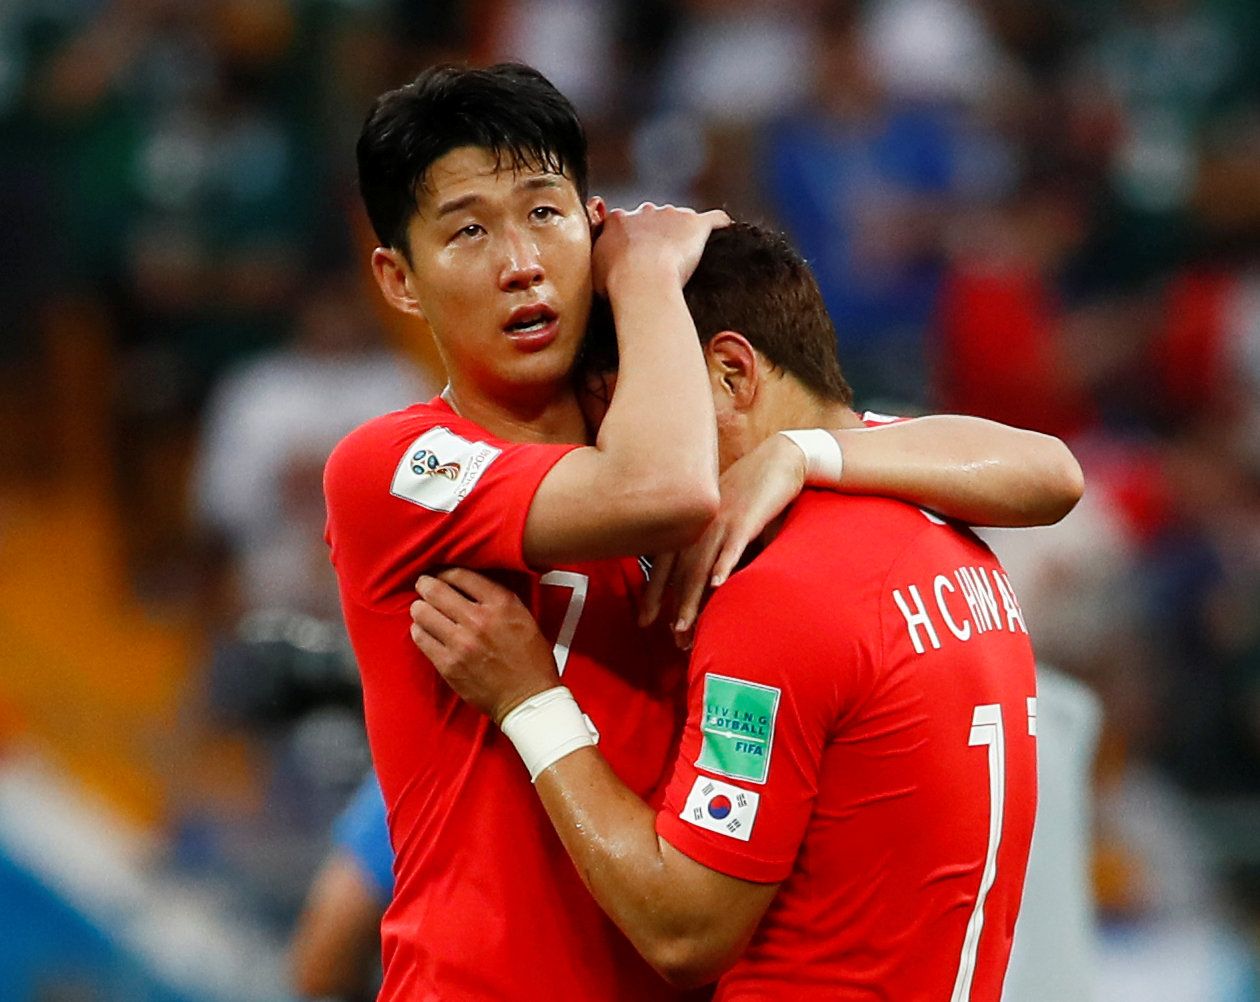 Soccer Football - World Cup - Group F - South Korea vs Mexico - Rostov Arena, Rostov-on-Don, Russia - June 23, 2018   South Korea's Son Heung-min and Hwang Hee-chan look dejected after the match        REUTERS/Jason Cairnduff